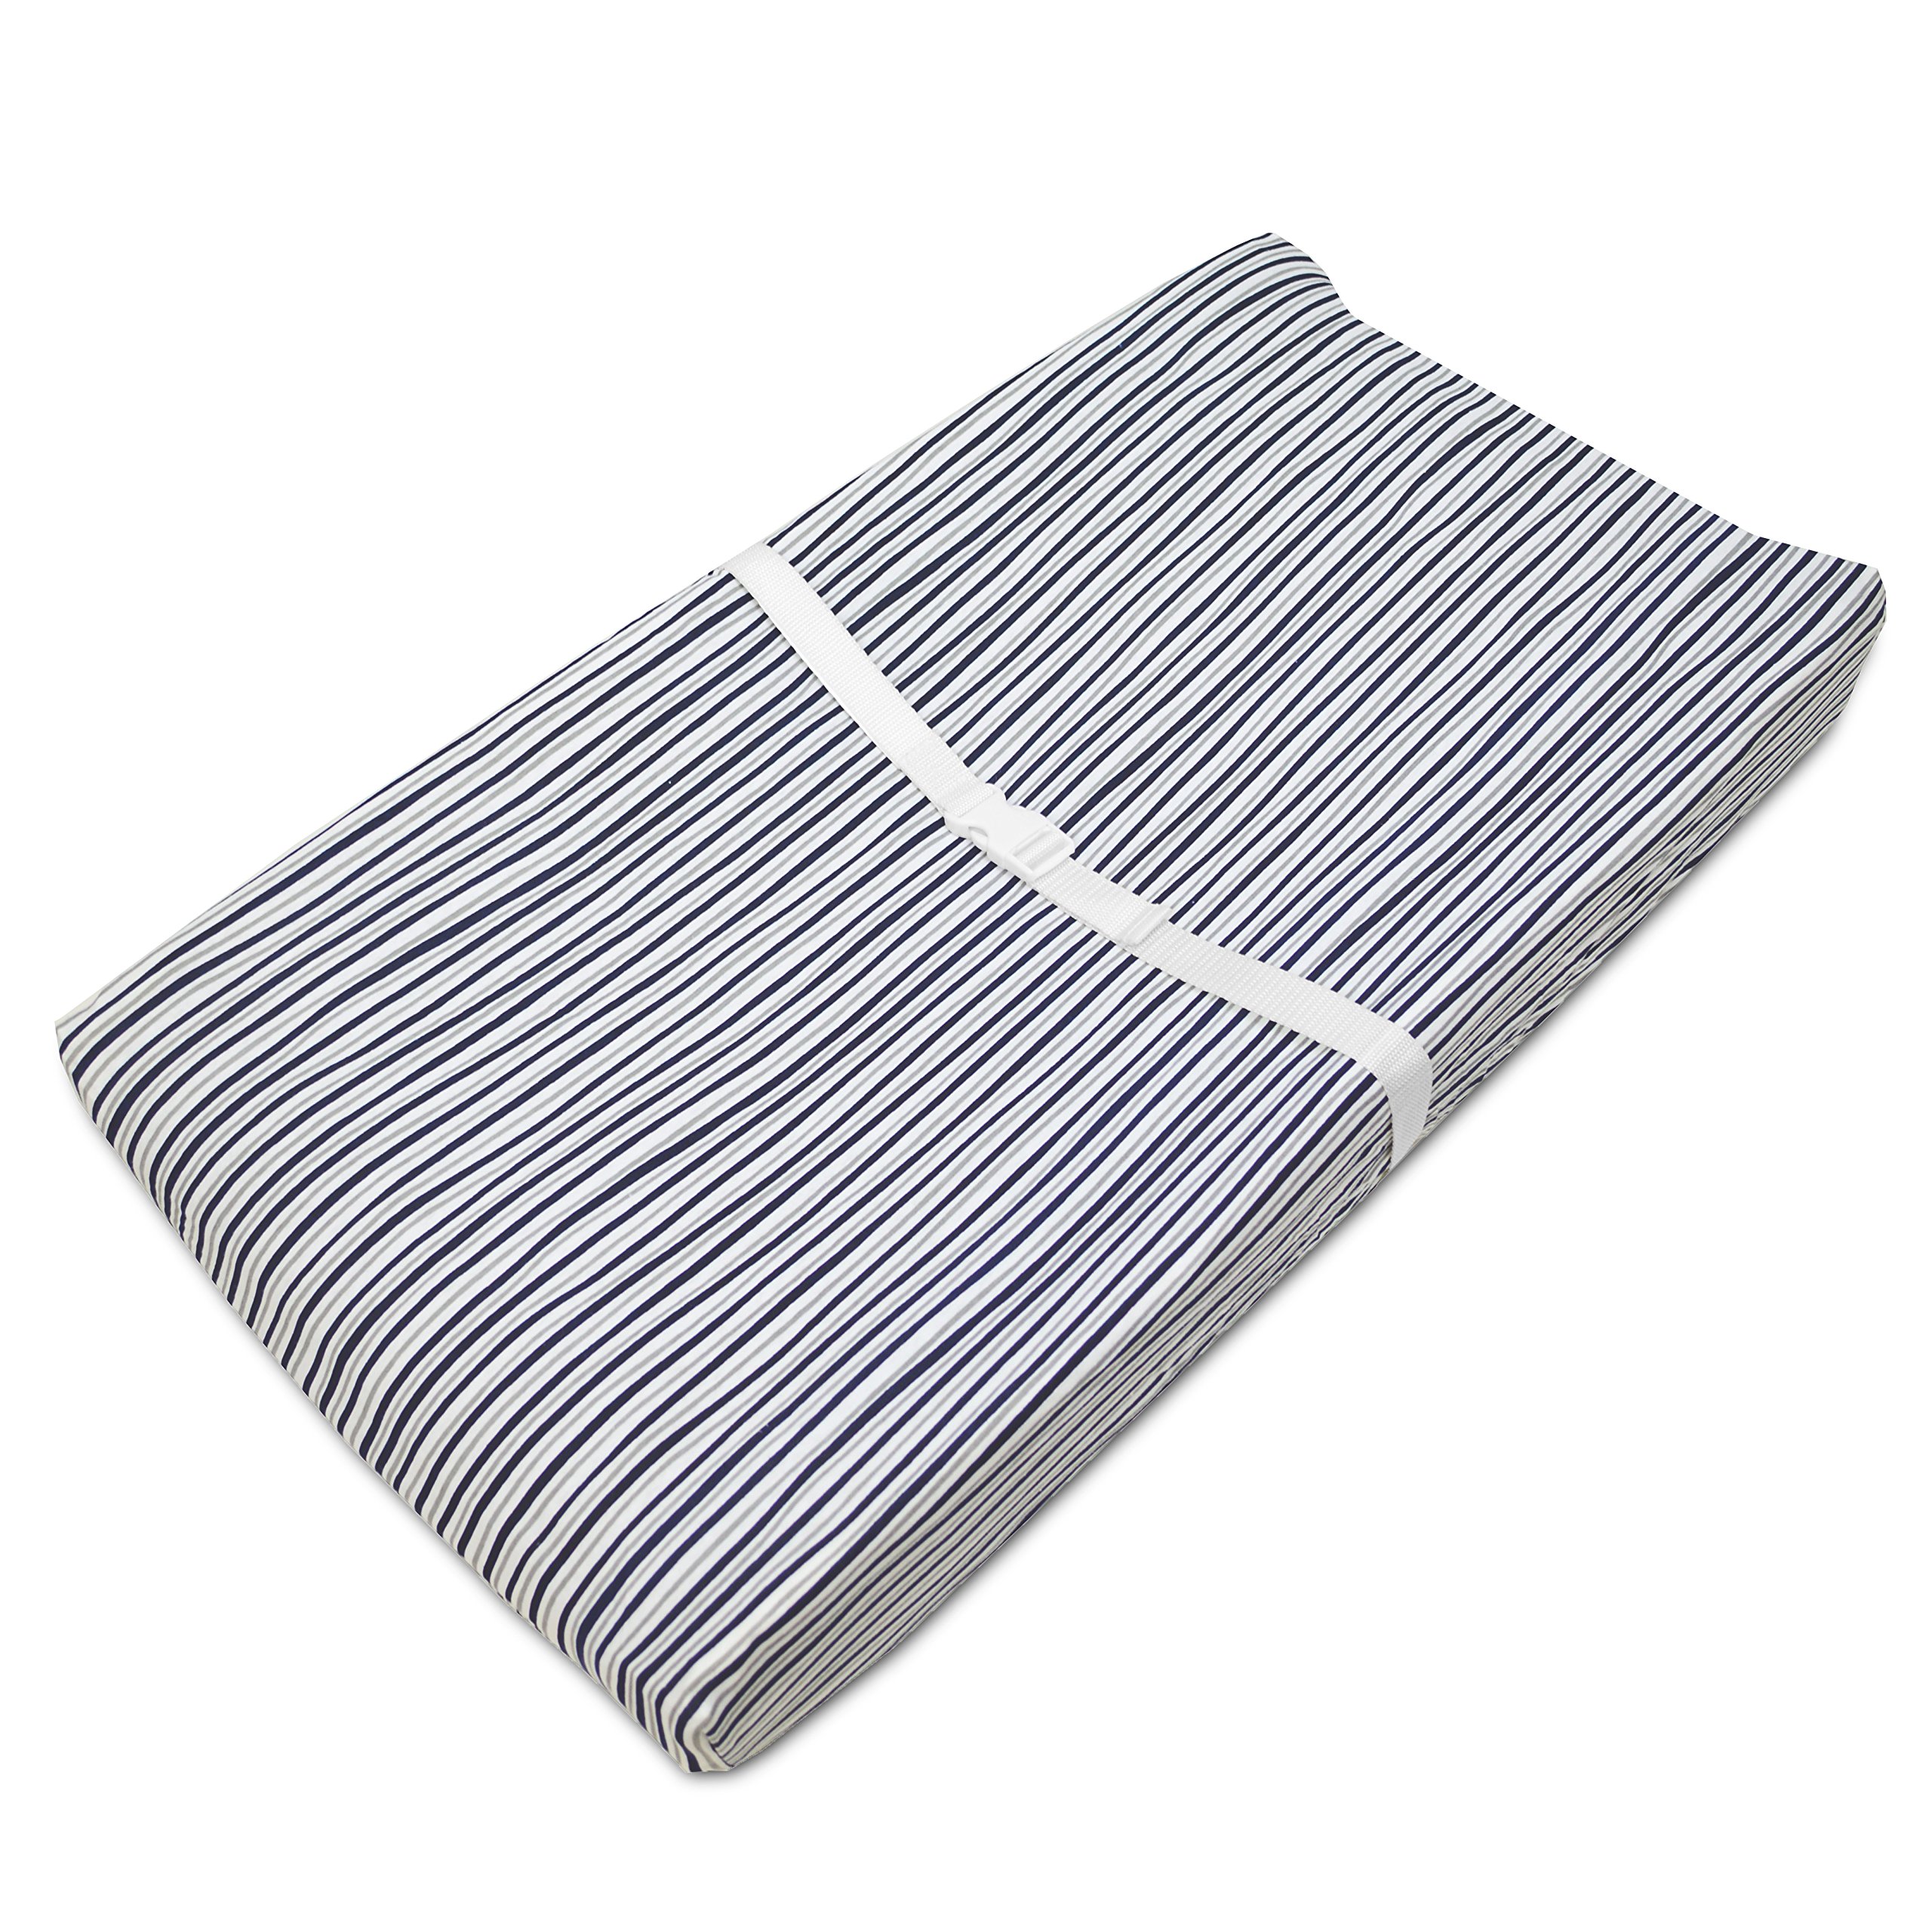 American Baby Company 2 Pack Printed 100% Cotton Knit Fitted Contoured Changing Table Pad Cover - Compatible with Mika Micky Bassinet, Gray Stripes and Sports, for Boys and Girls